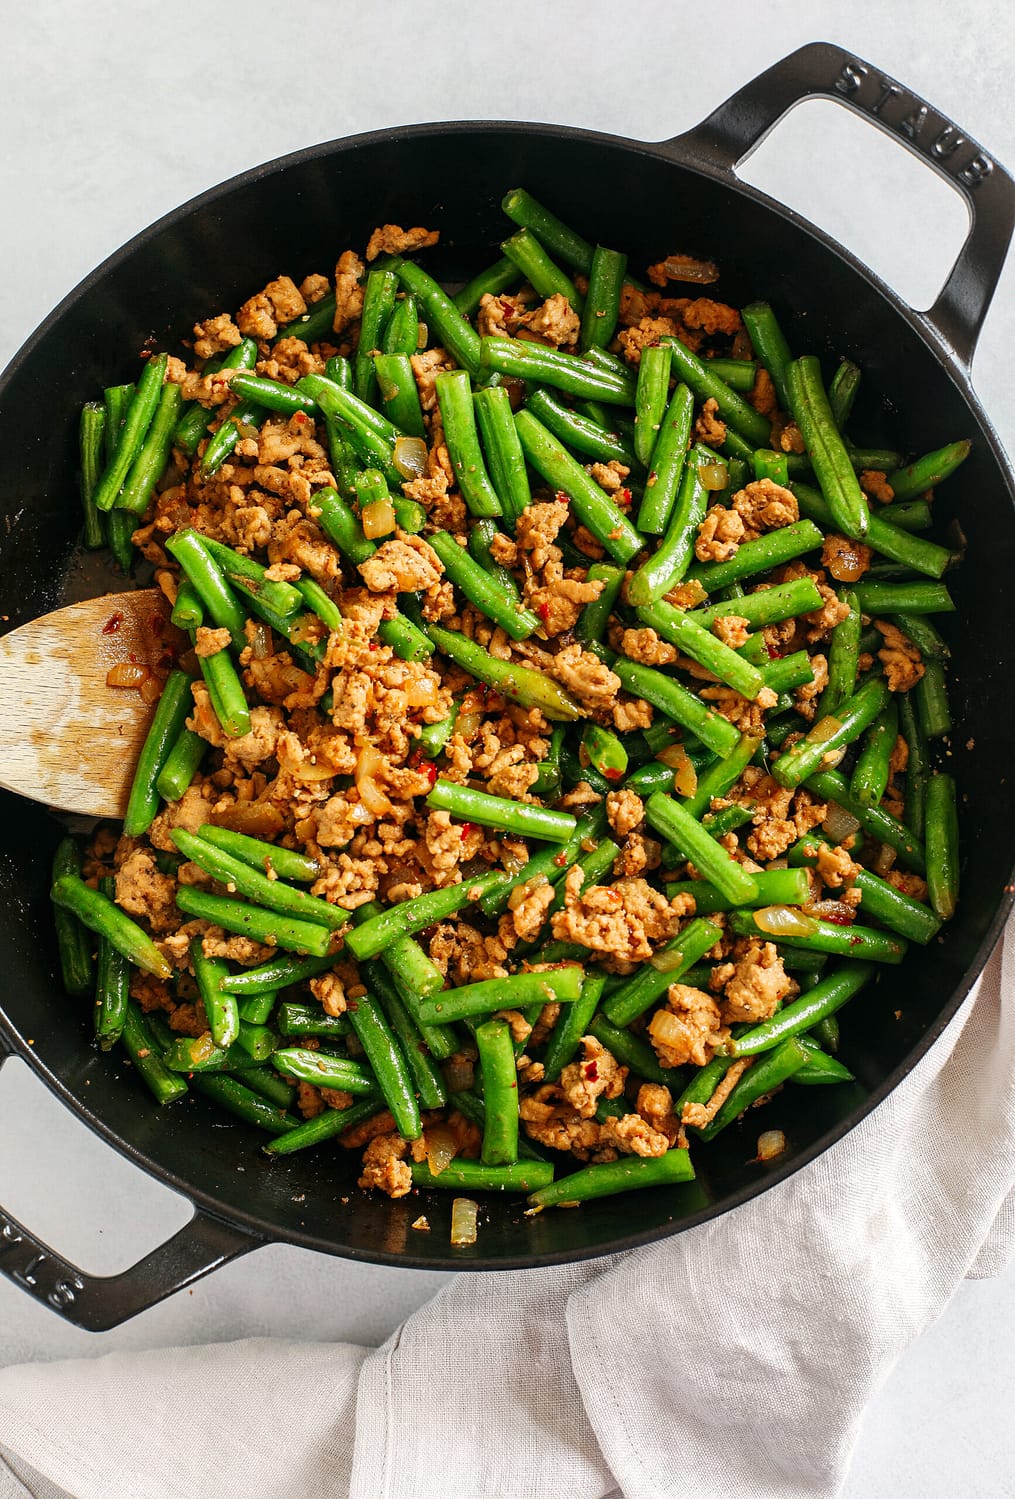 Quick and flavorful Ground Turkey and Green Bean Stir Fry easily made in under 20 minutes all in one pan!  Lean ground turkey with crisp green beans all tossed together in the most delicious Asian-inspired sauce that